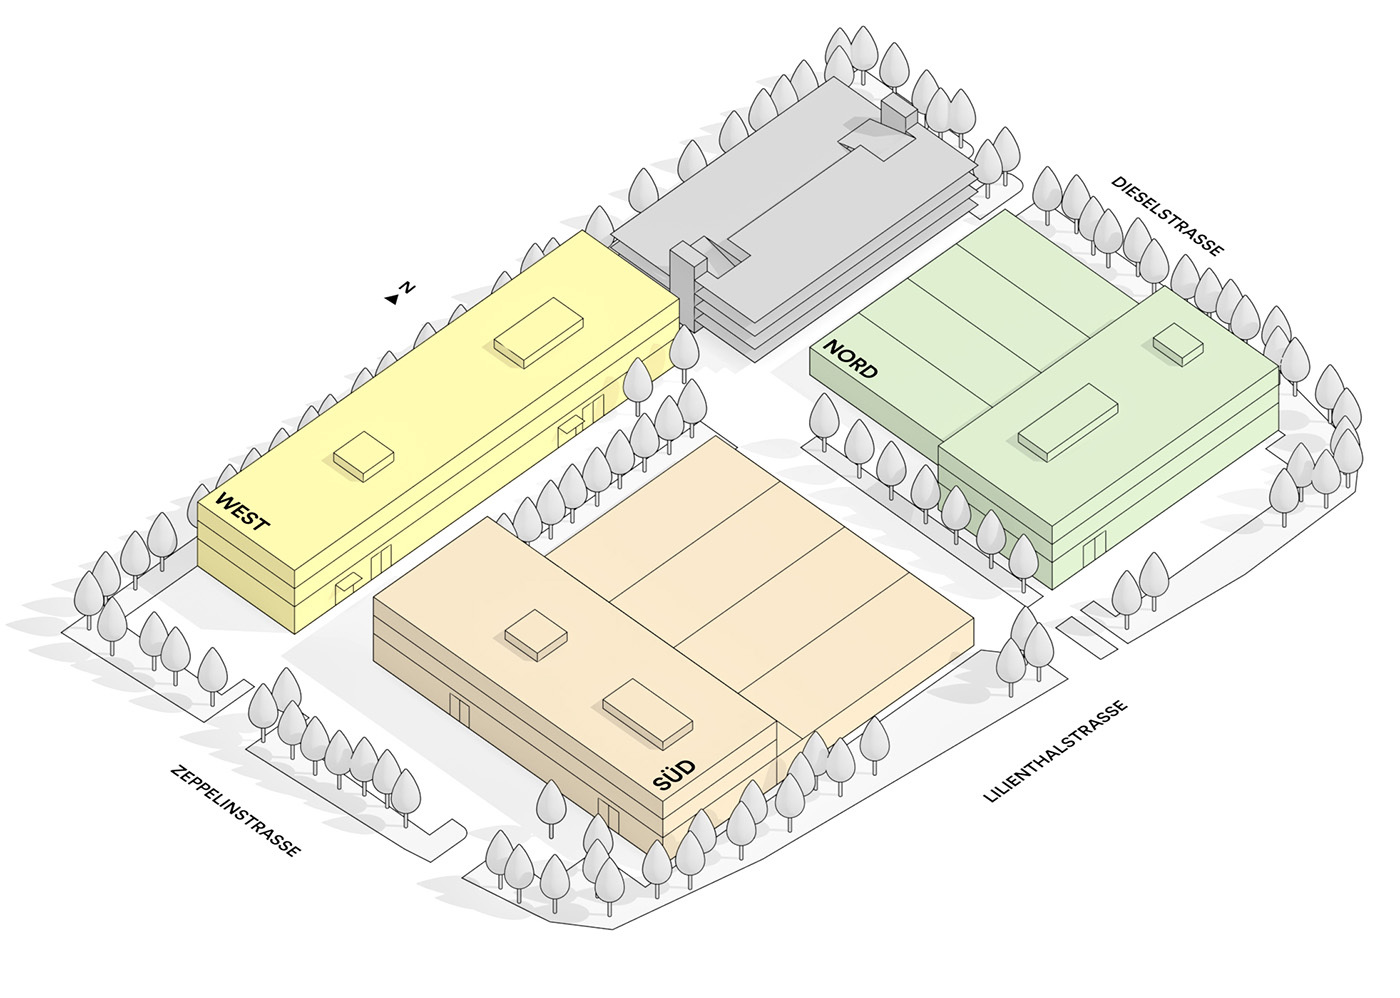 Floor plans of the three parts of the new foundry building on Zeppelinstraße, Lilienthalstraße and Dieselstraße